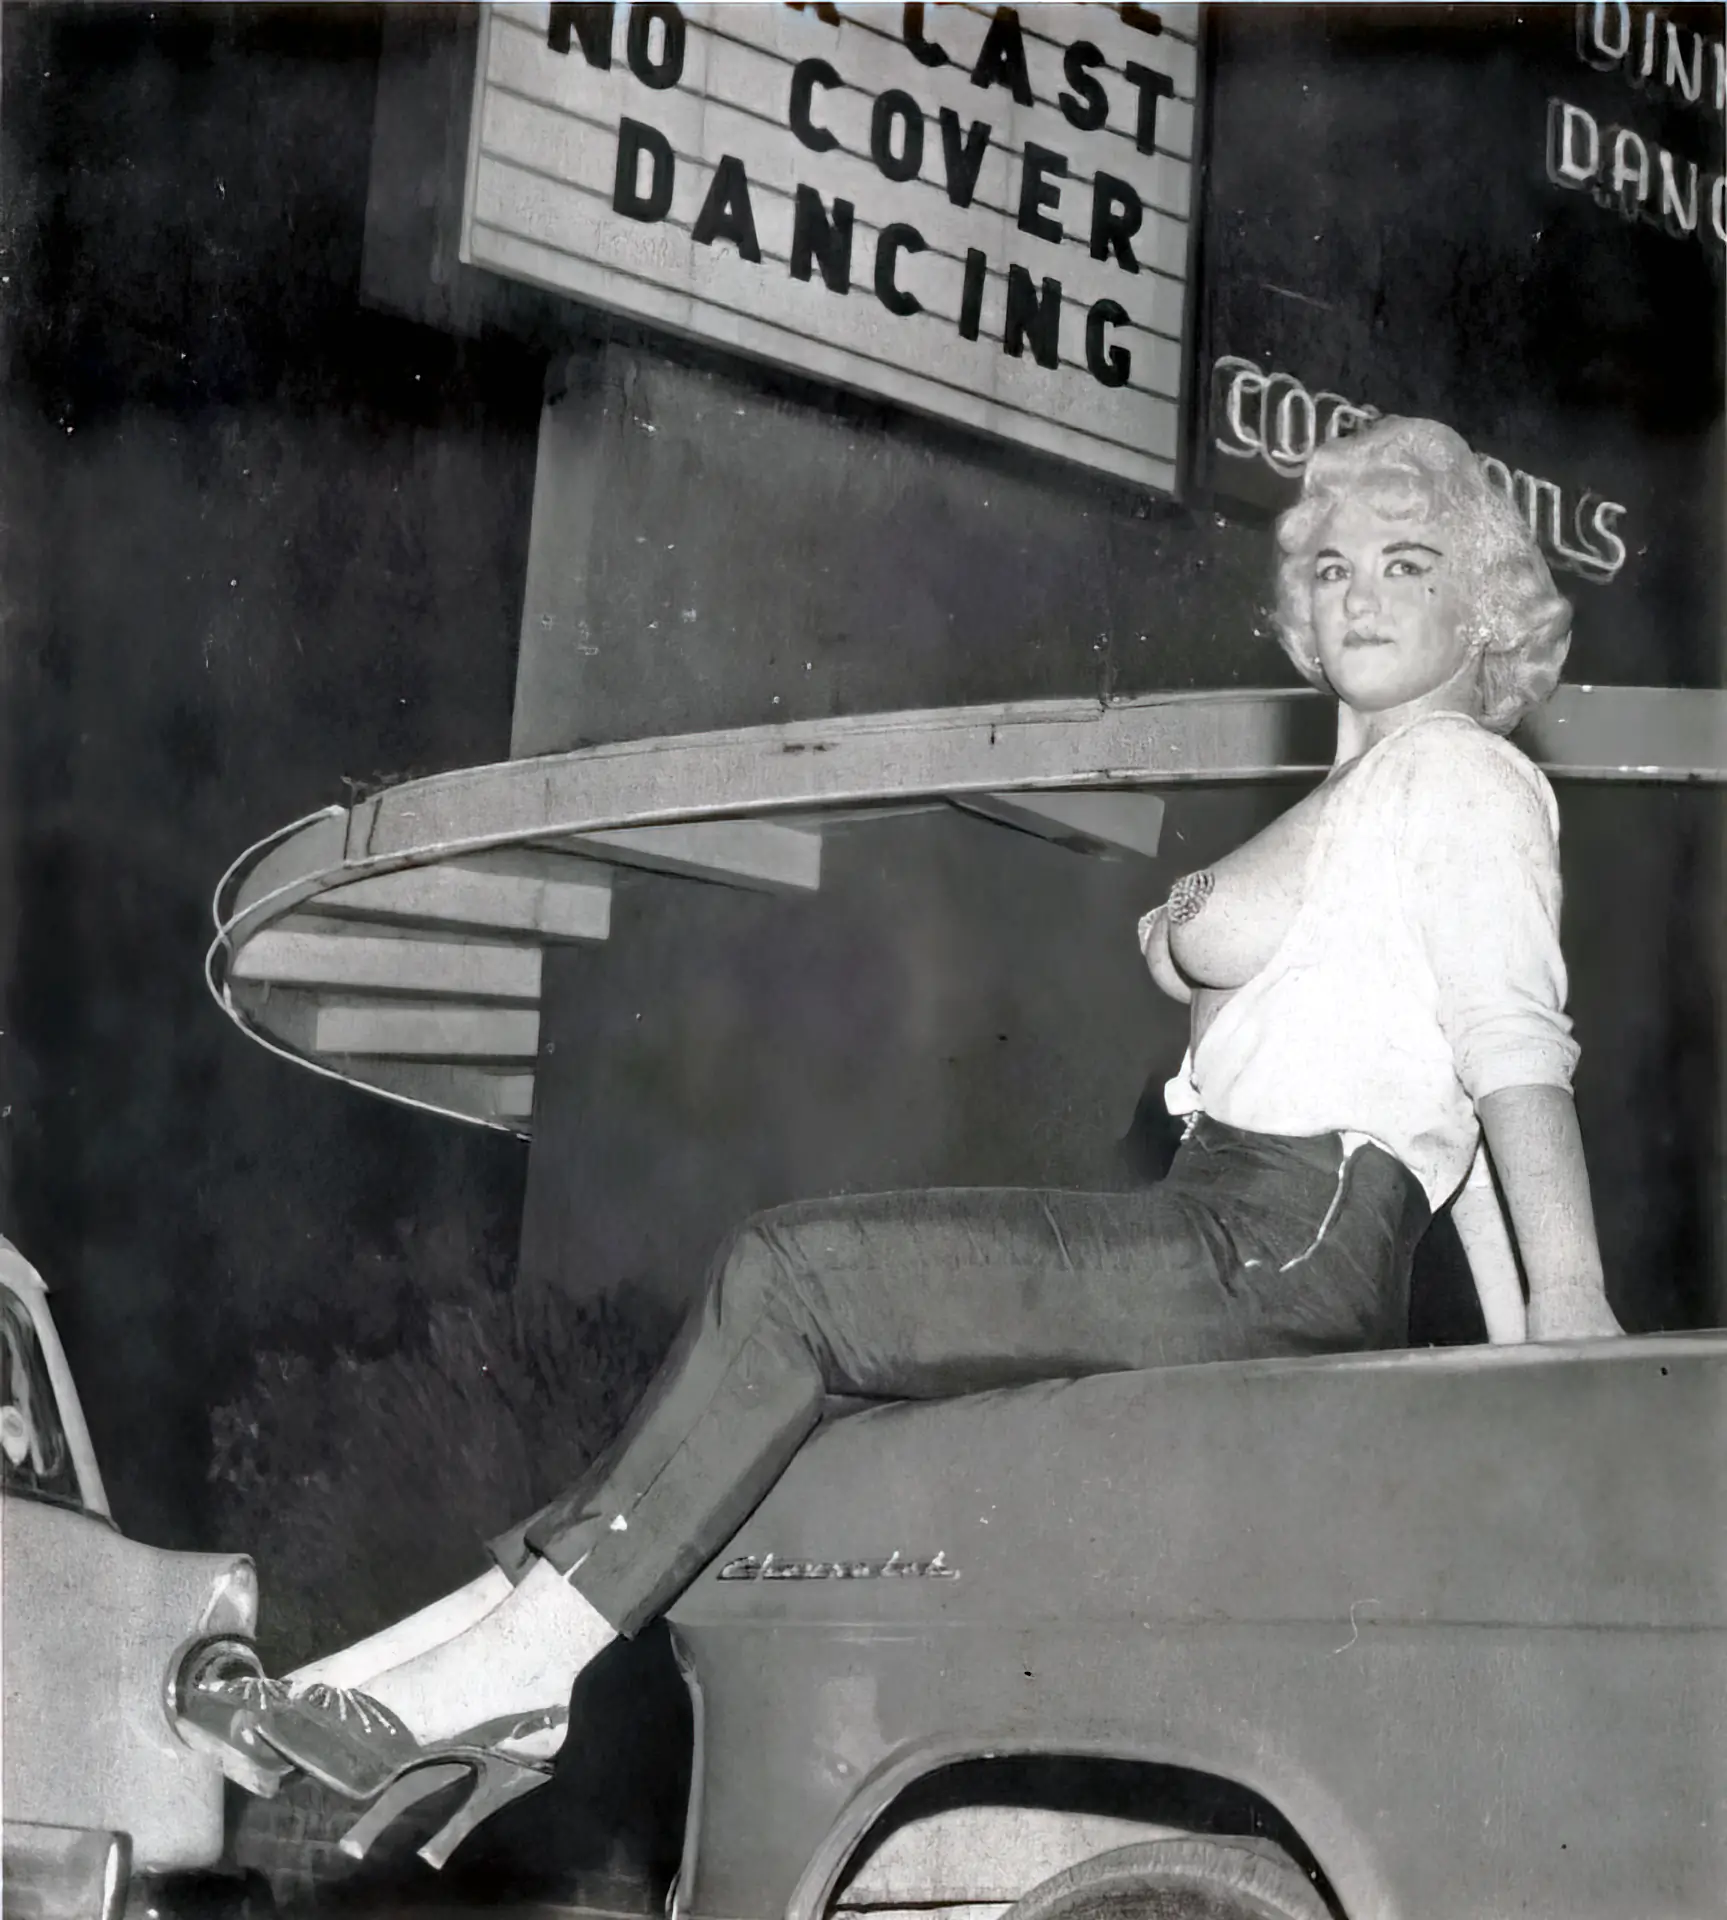 Older burlesque girl sits on a car in an unbuttoned blouse